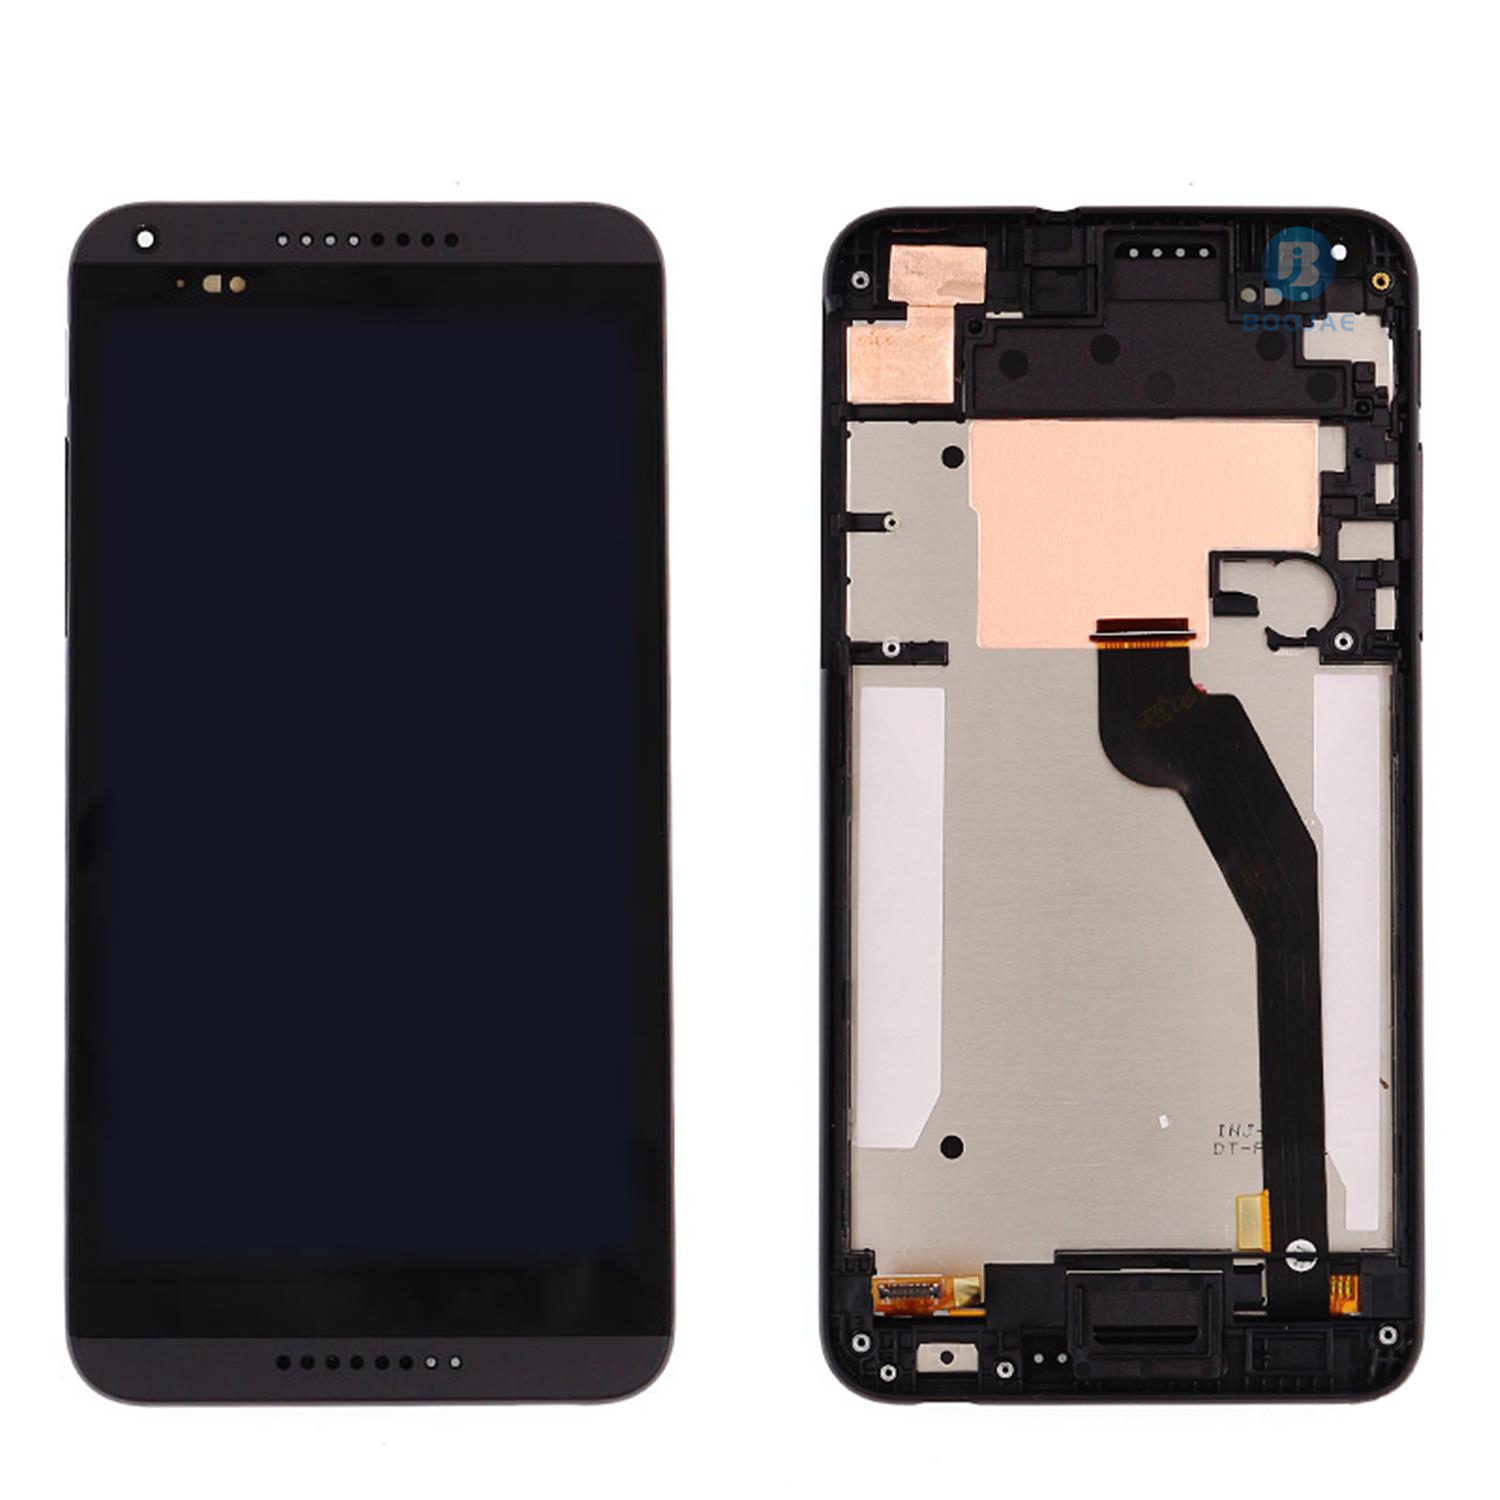 For HTC Desire 816G LCD Screen Display and Touch Panel Digitizer Assembly Replacement